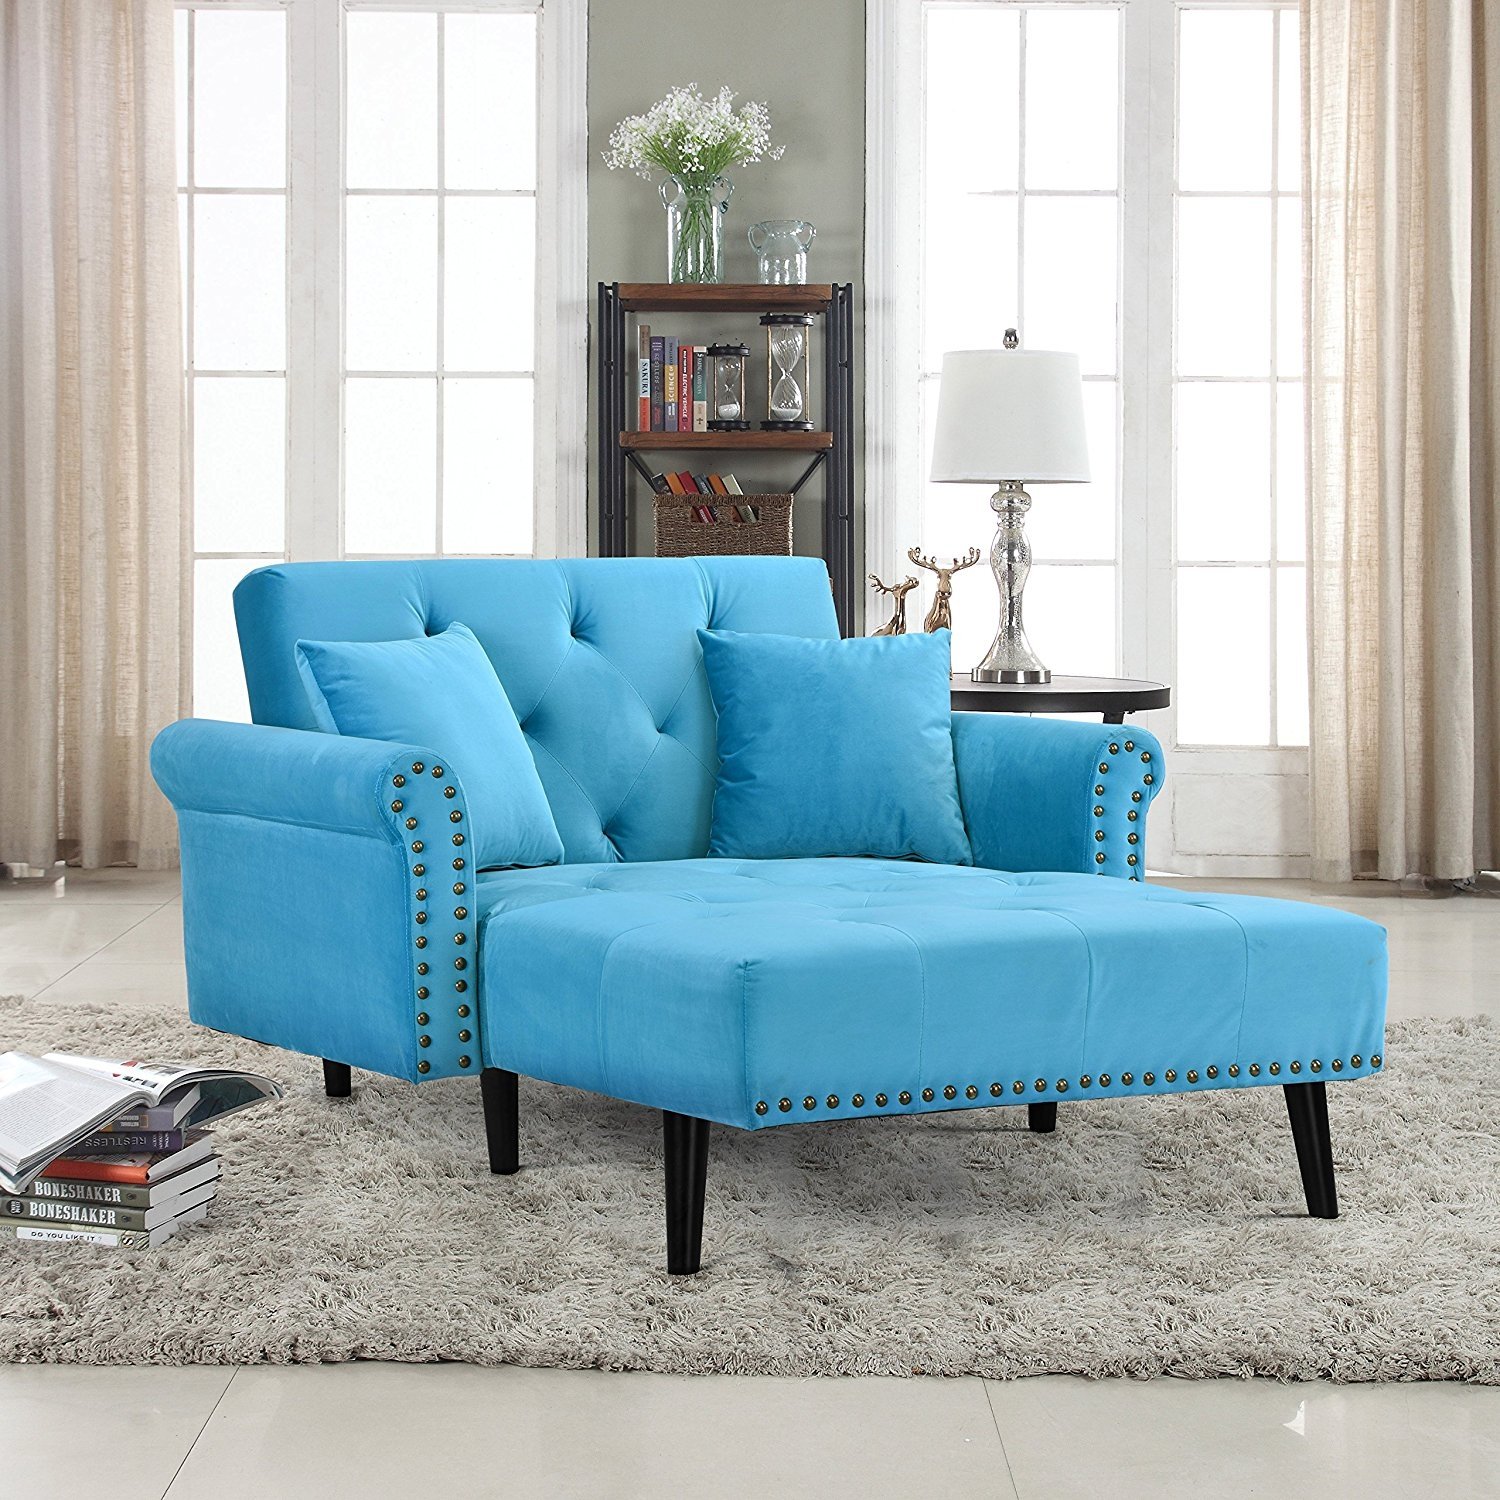 Serena Tufted Chaise Lounge Mystere Traditional Indoor Chaise Lounge